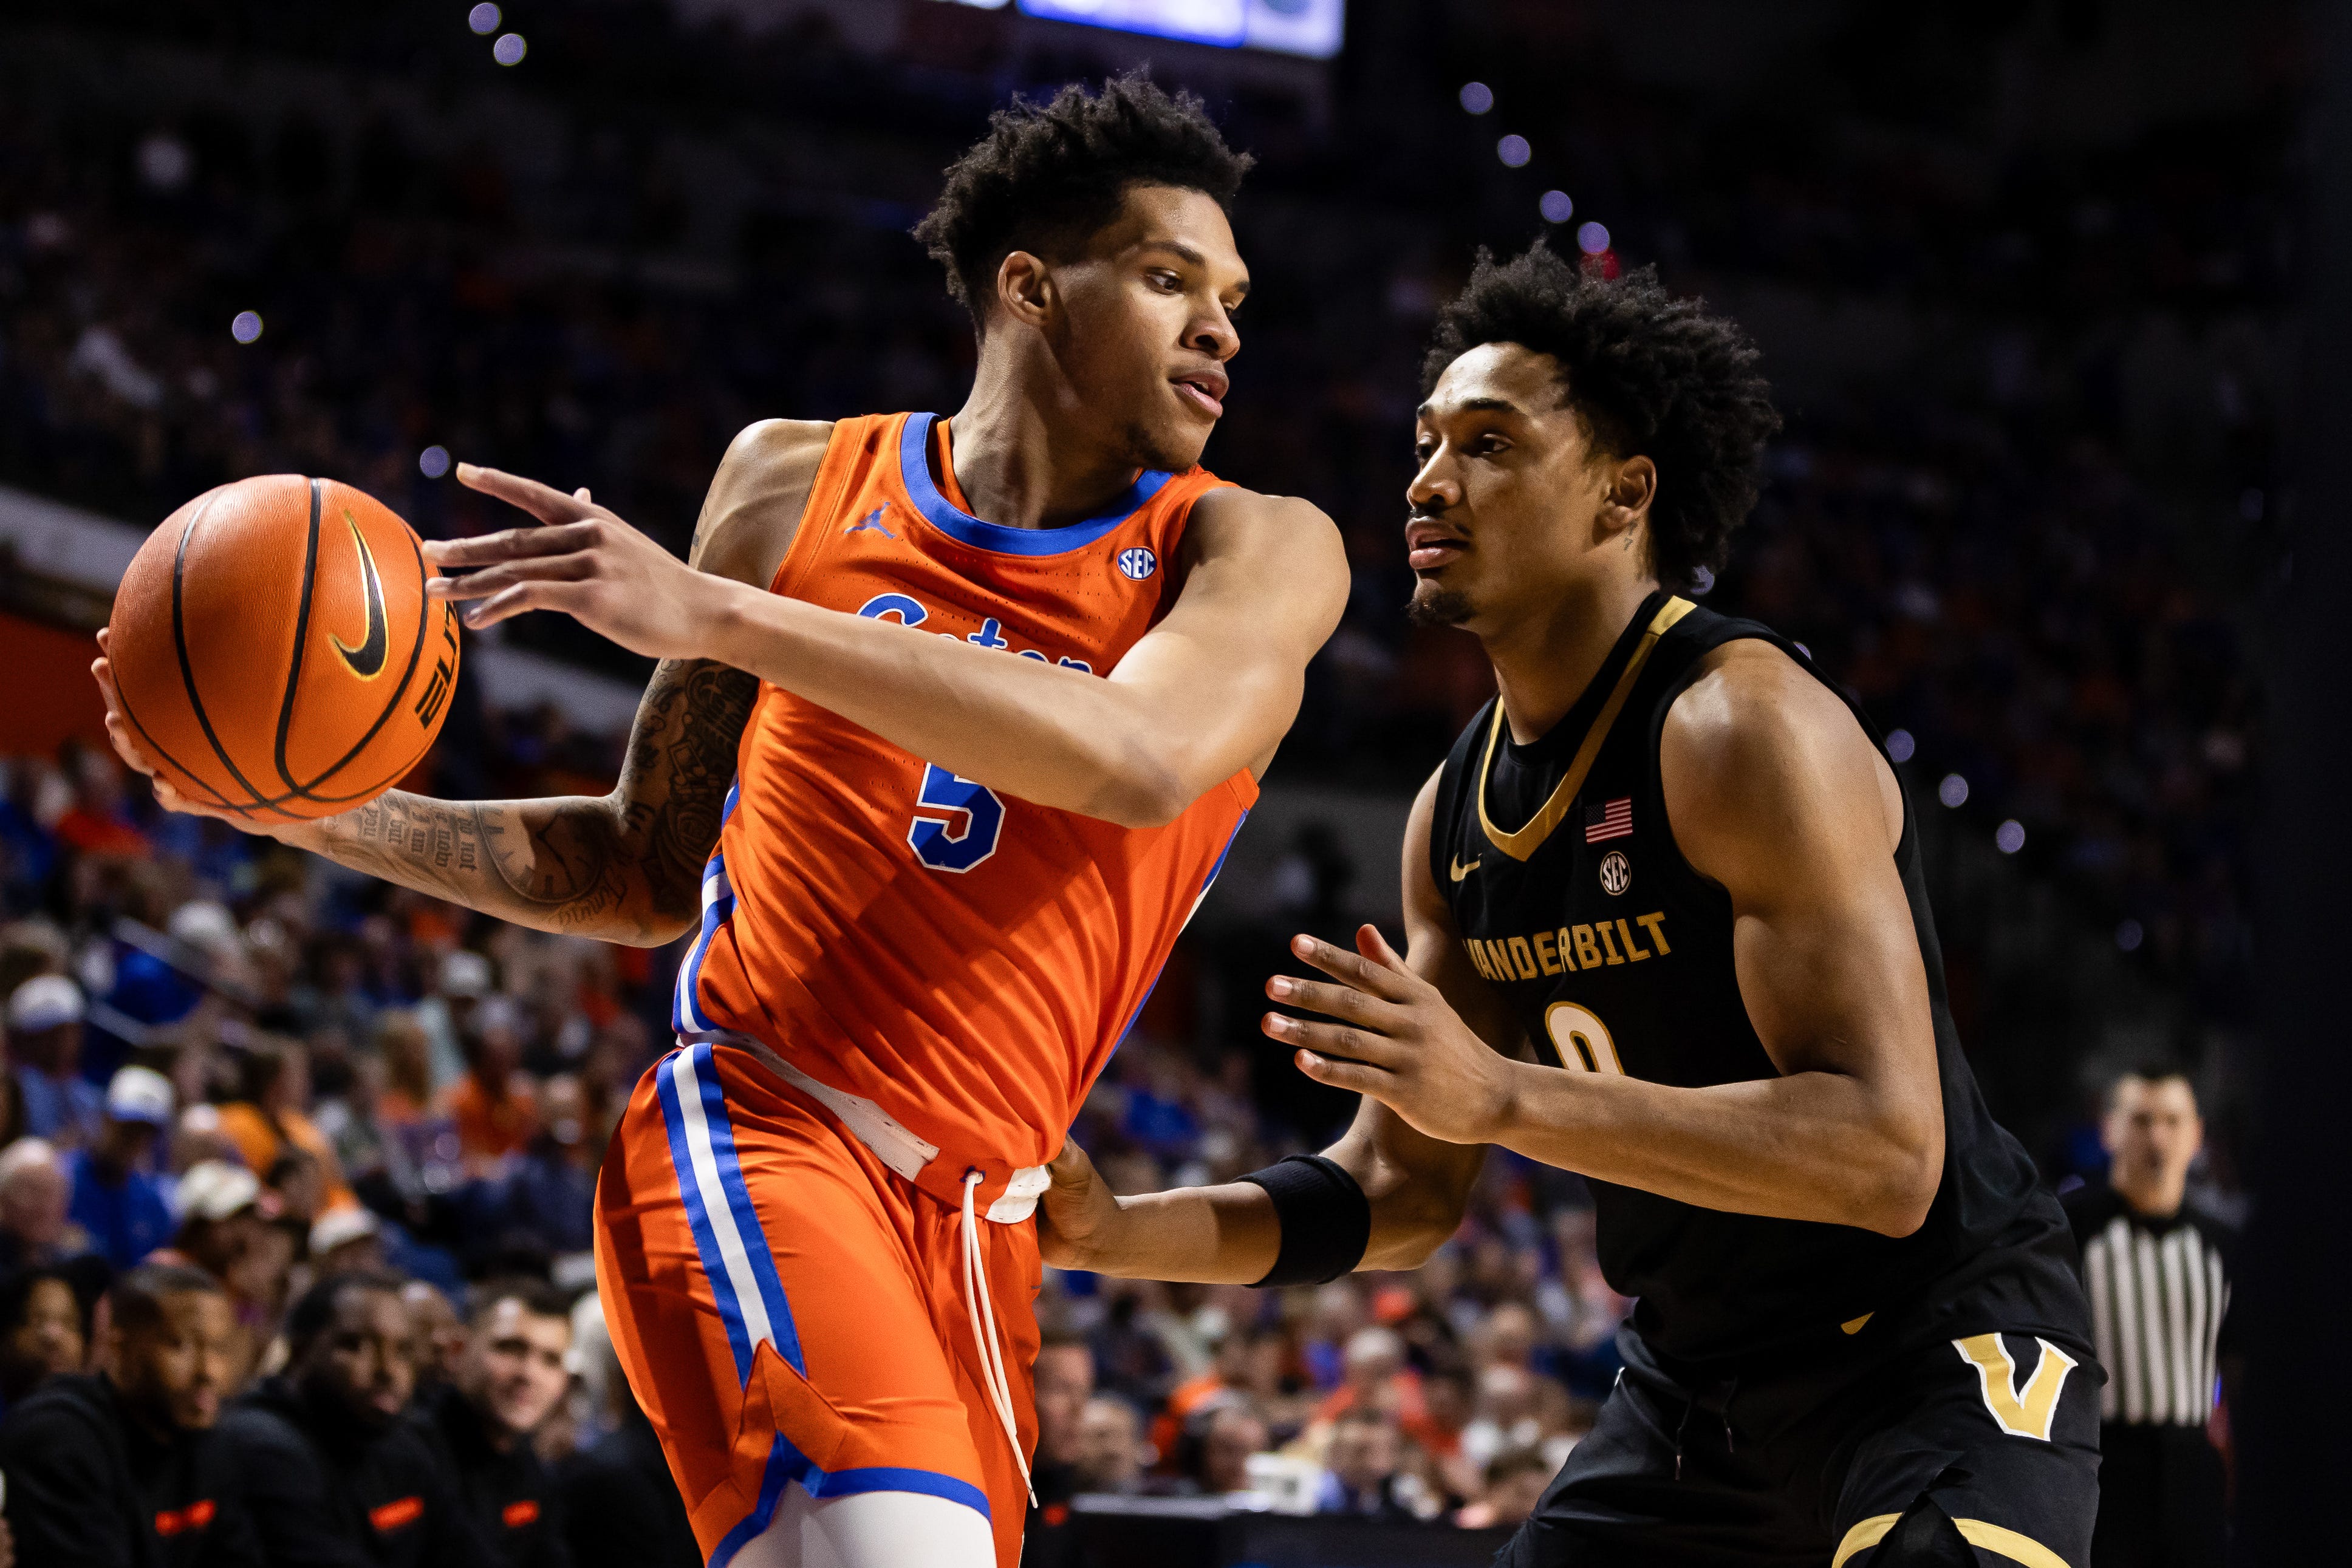 florida now a 6-seed in espn bracketology projections